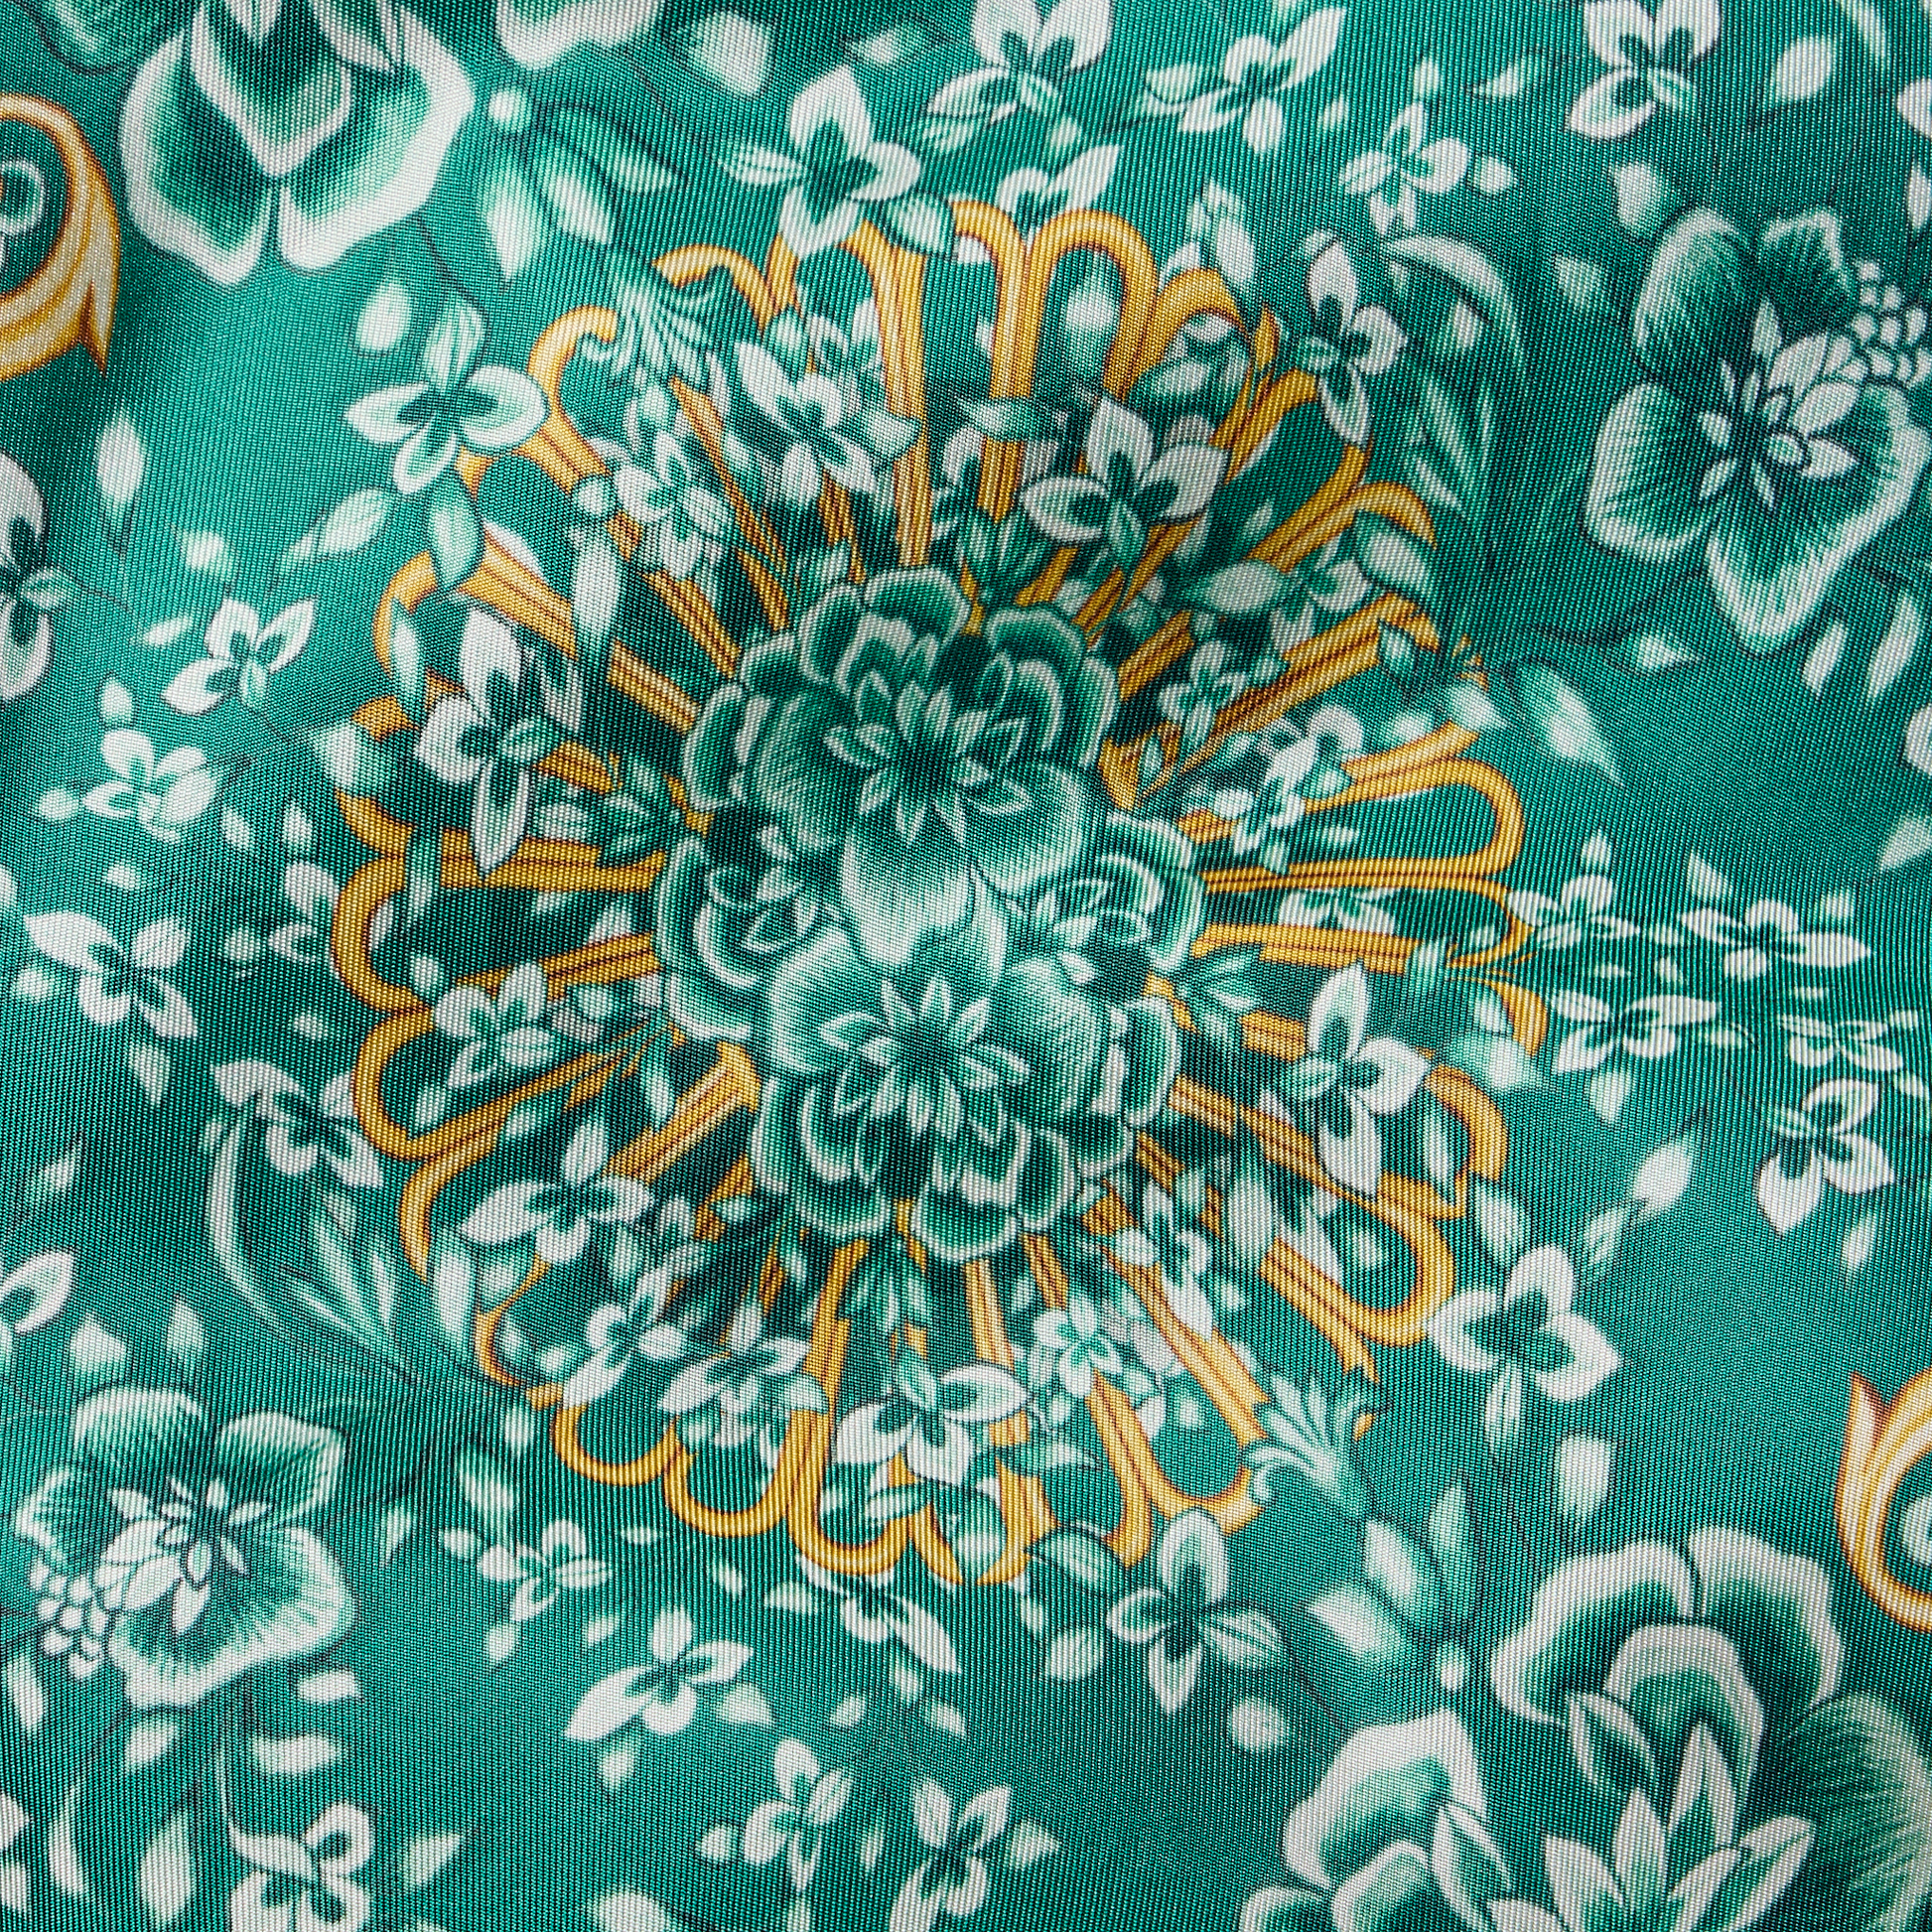 A 45mm silk scarf in a hand-painted print, inspired by the fine china in Vienna's Hofburg Palace.